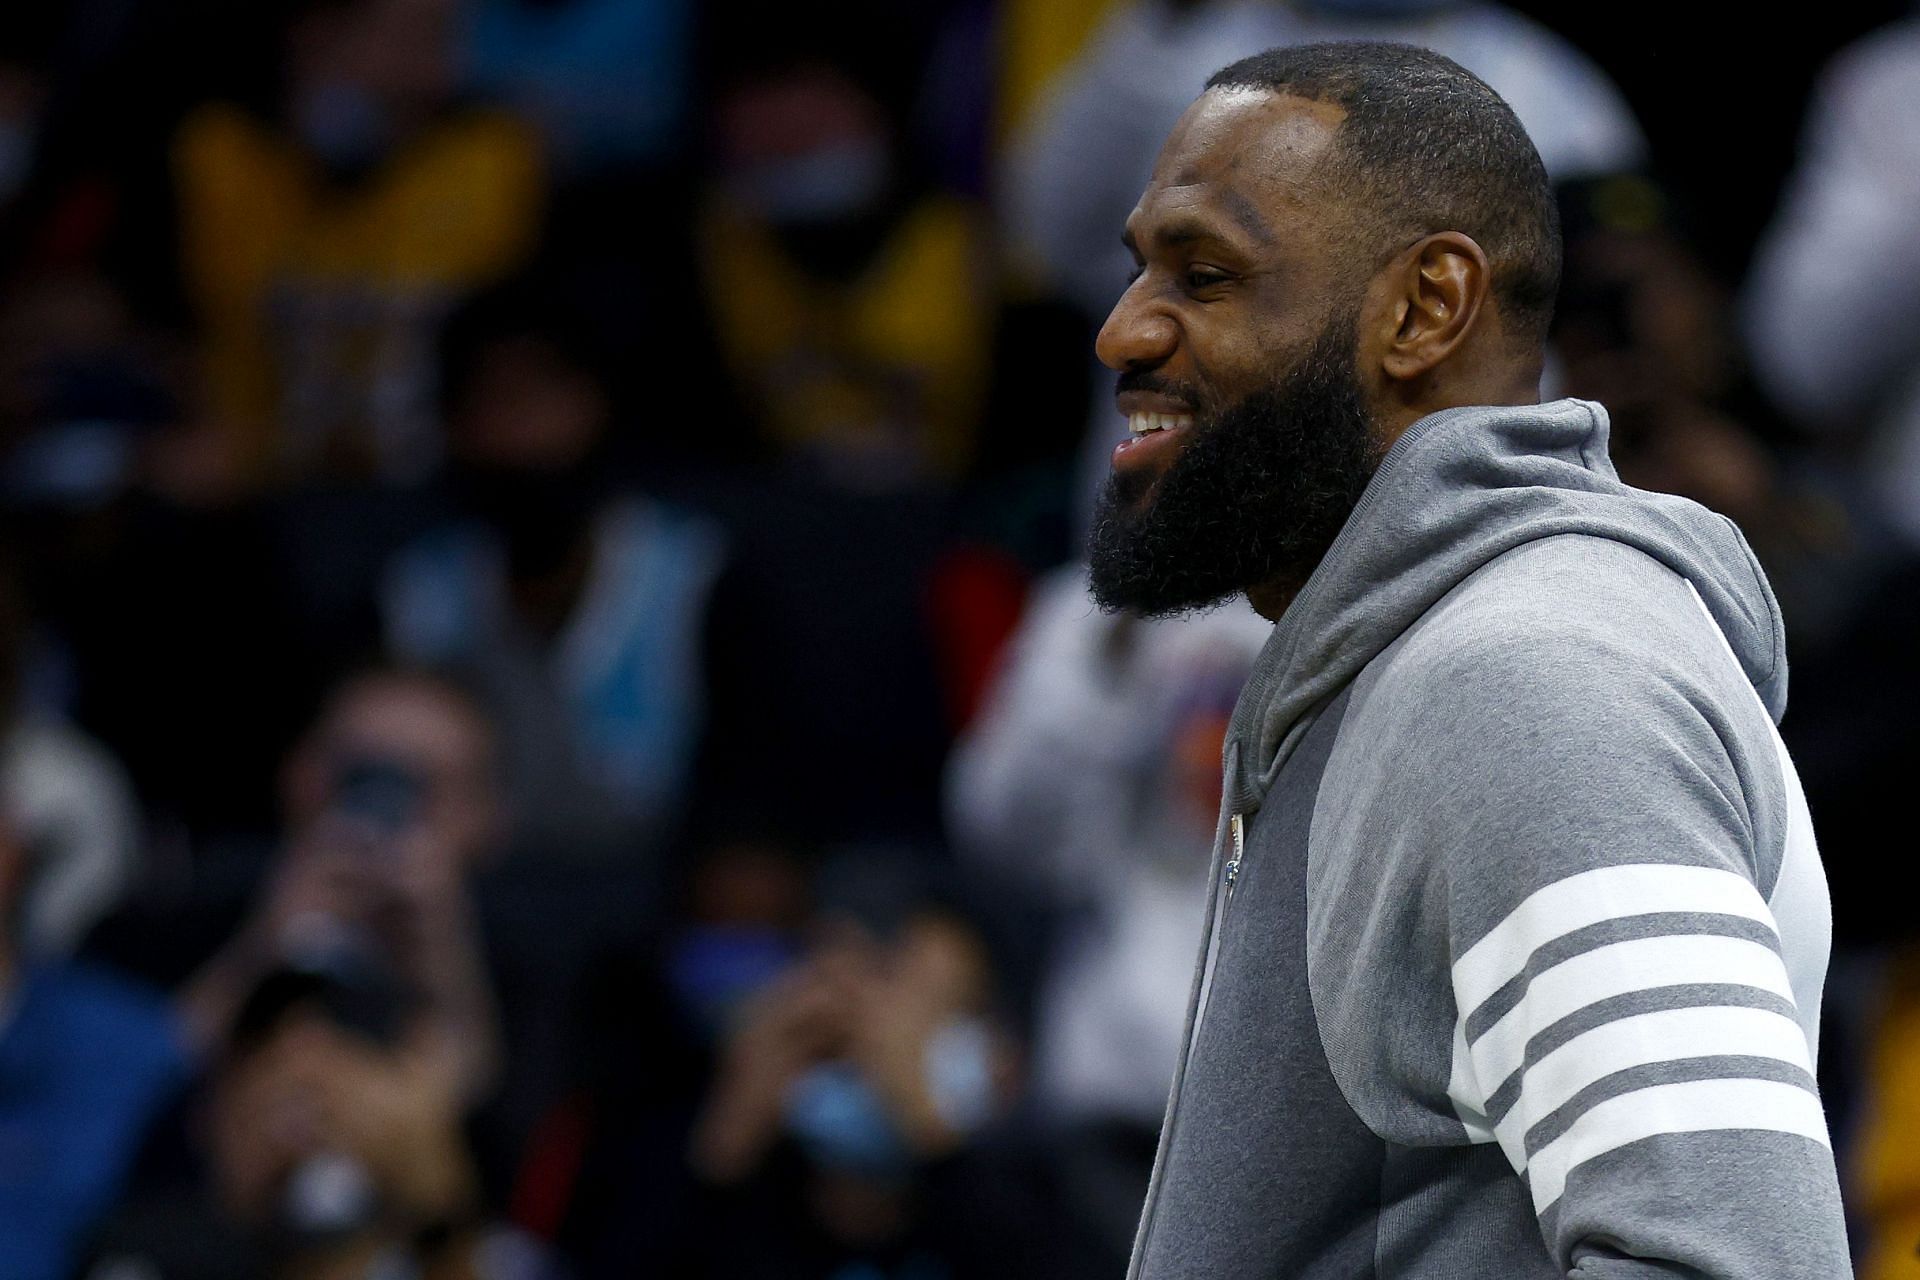 LeBron James sat out the game between the LA Lakers and the Los Angeles Clippers on Thursday